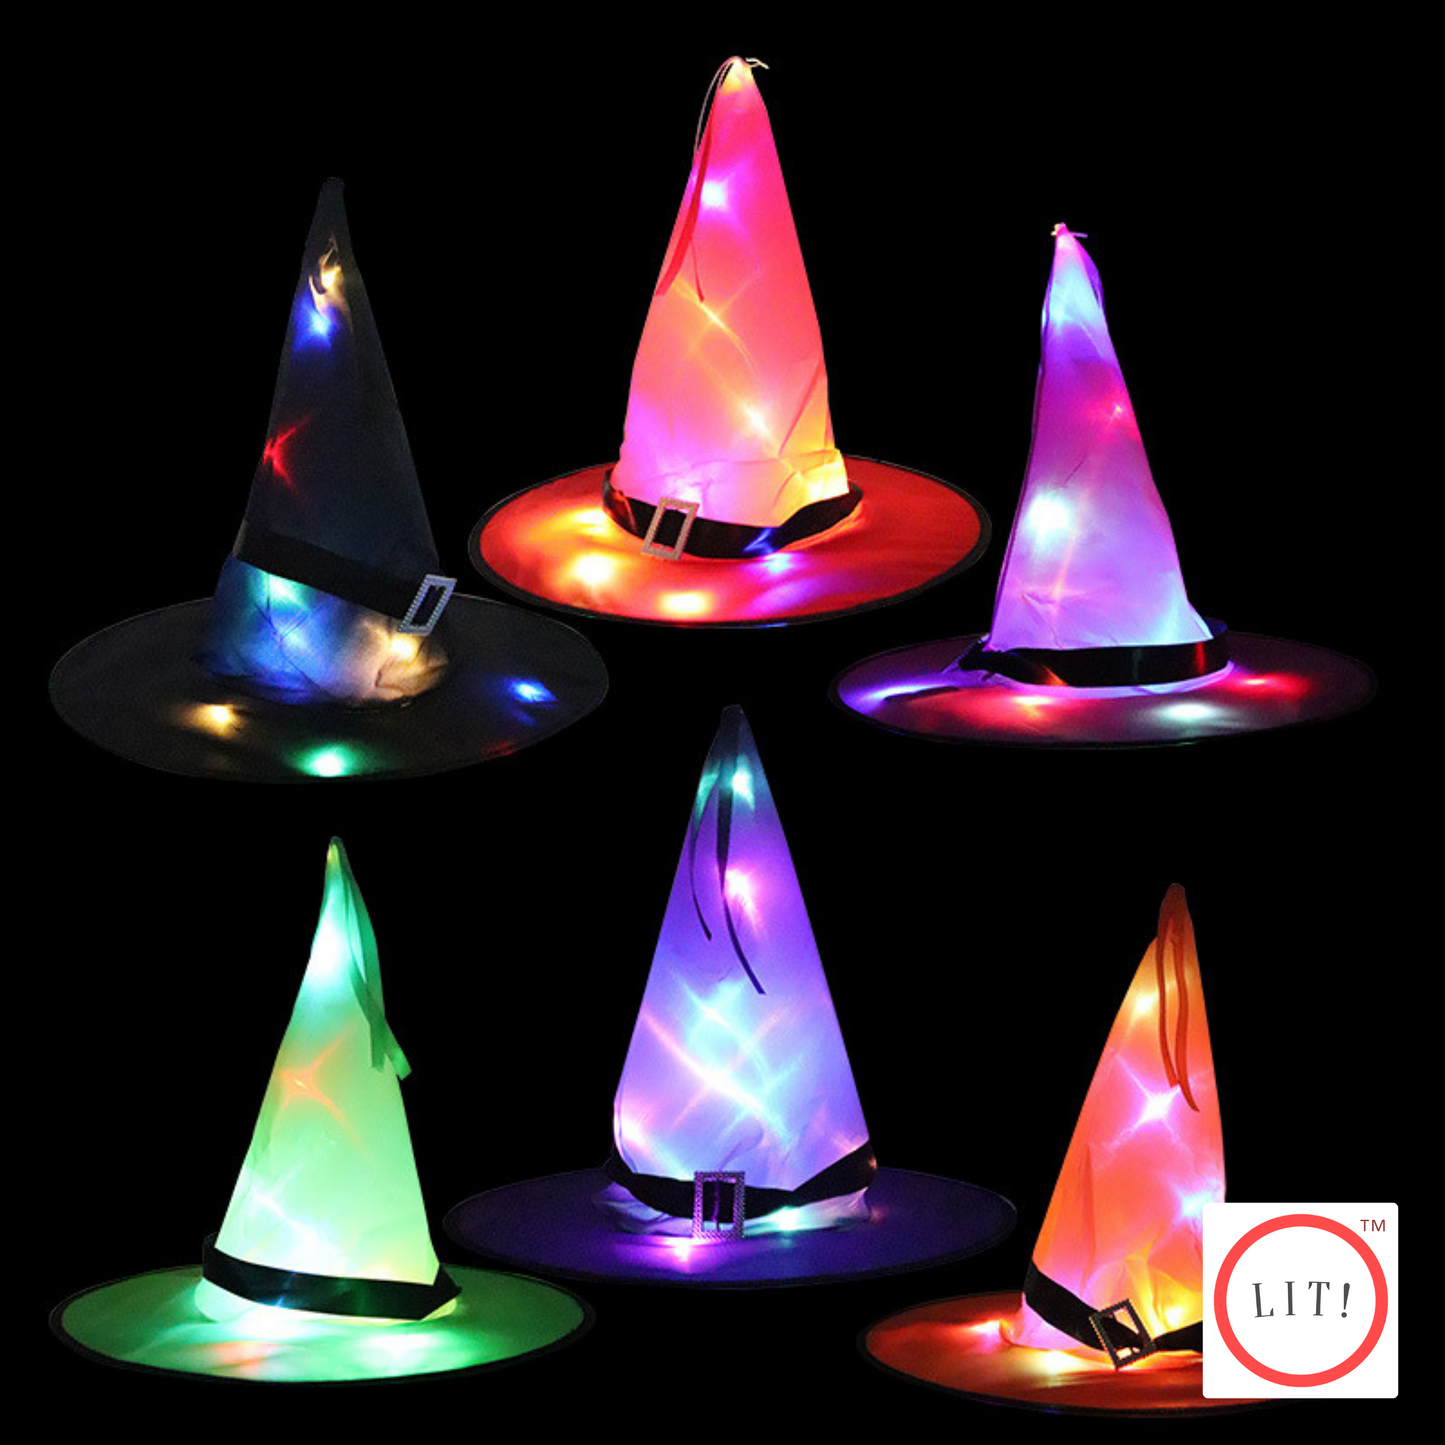 (Pack of 2) New Halloween Glowing LED Lights Witch Hat